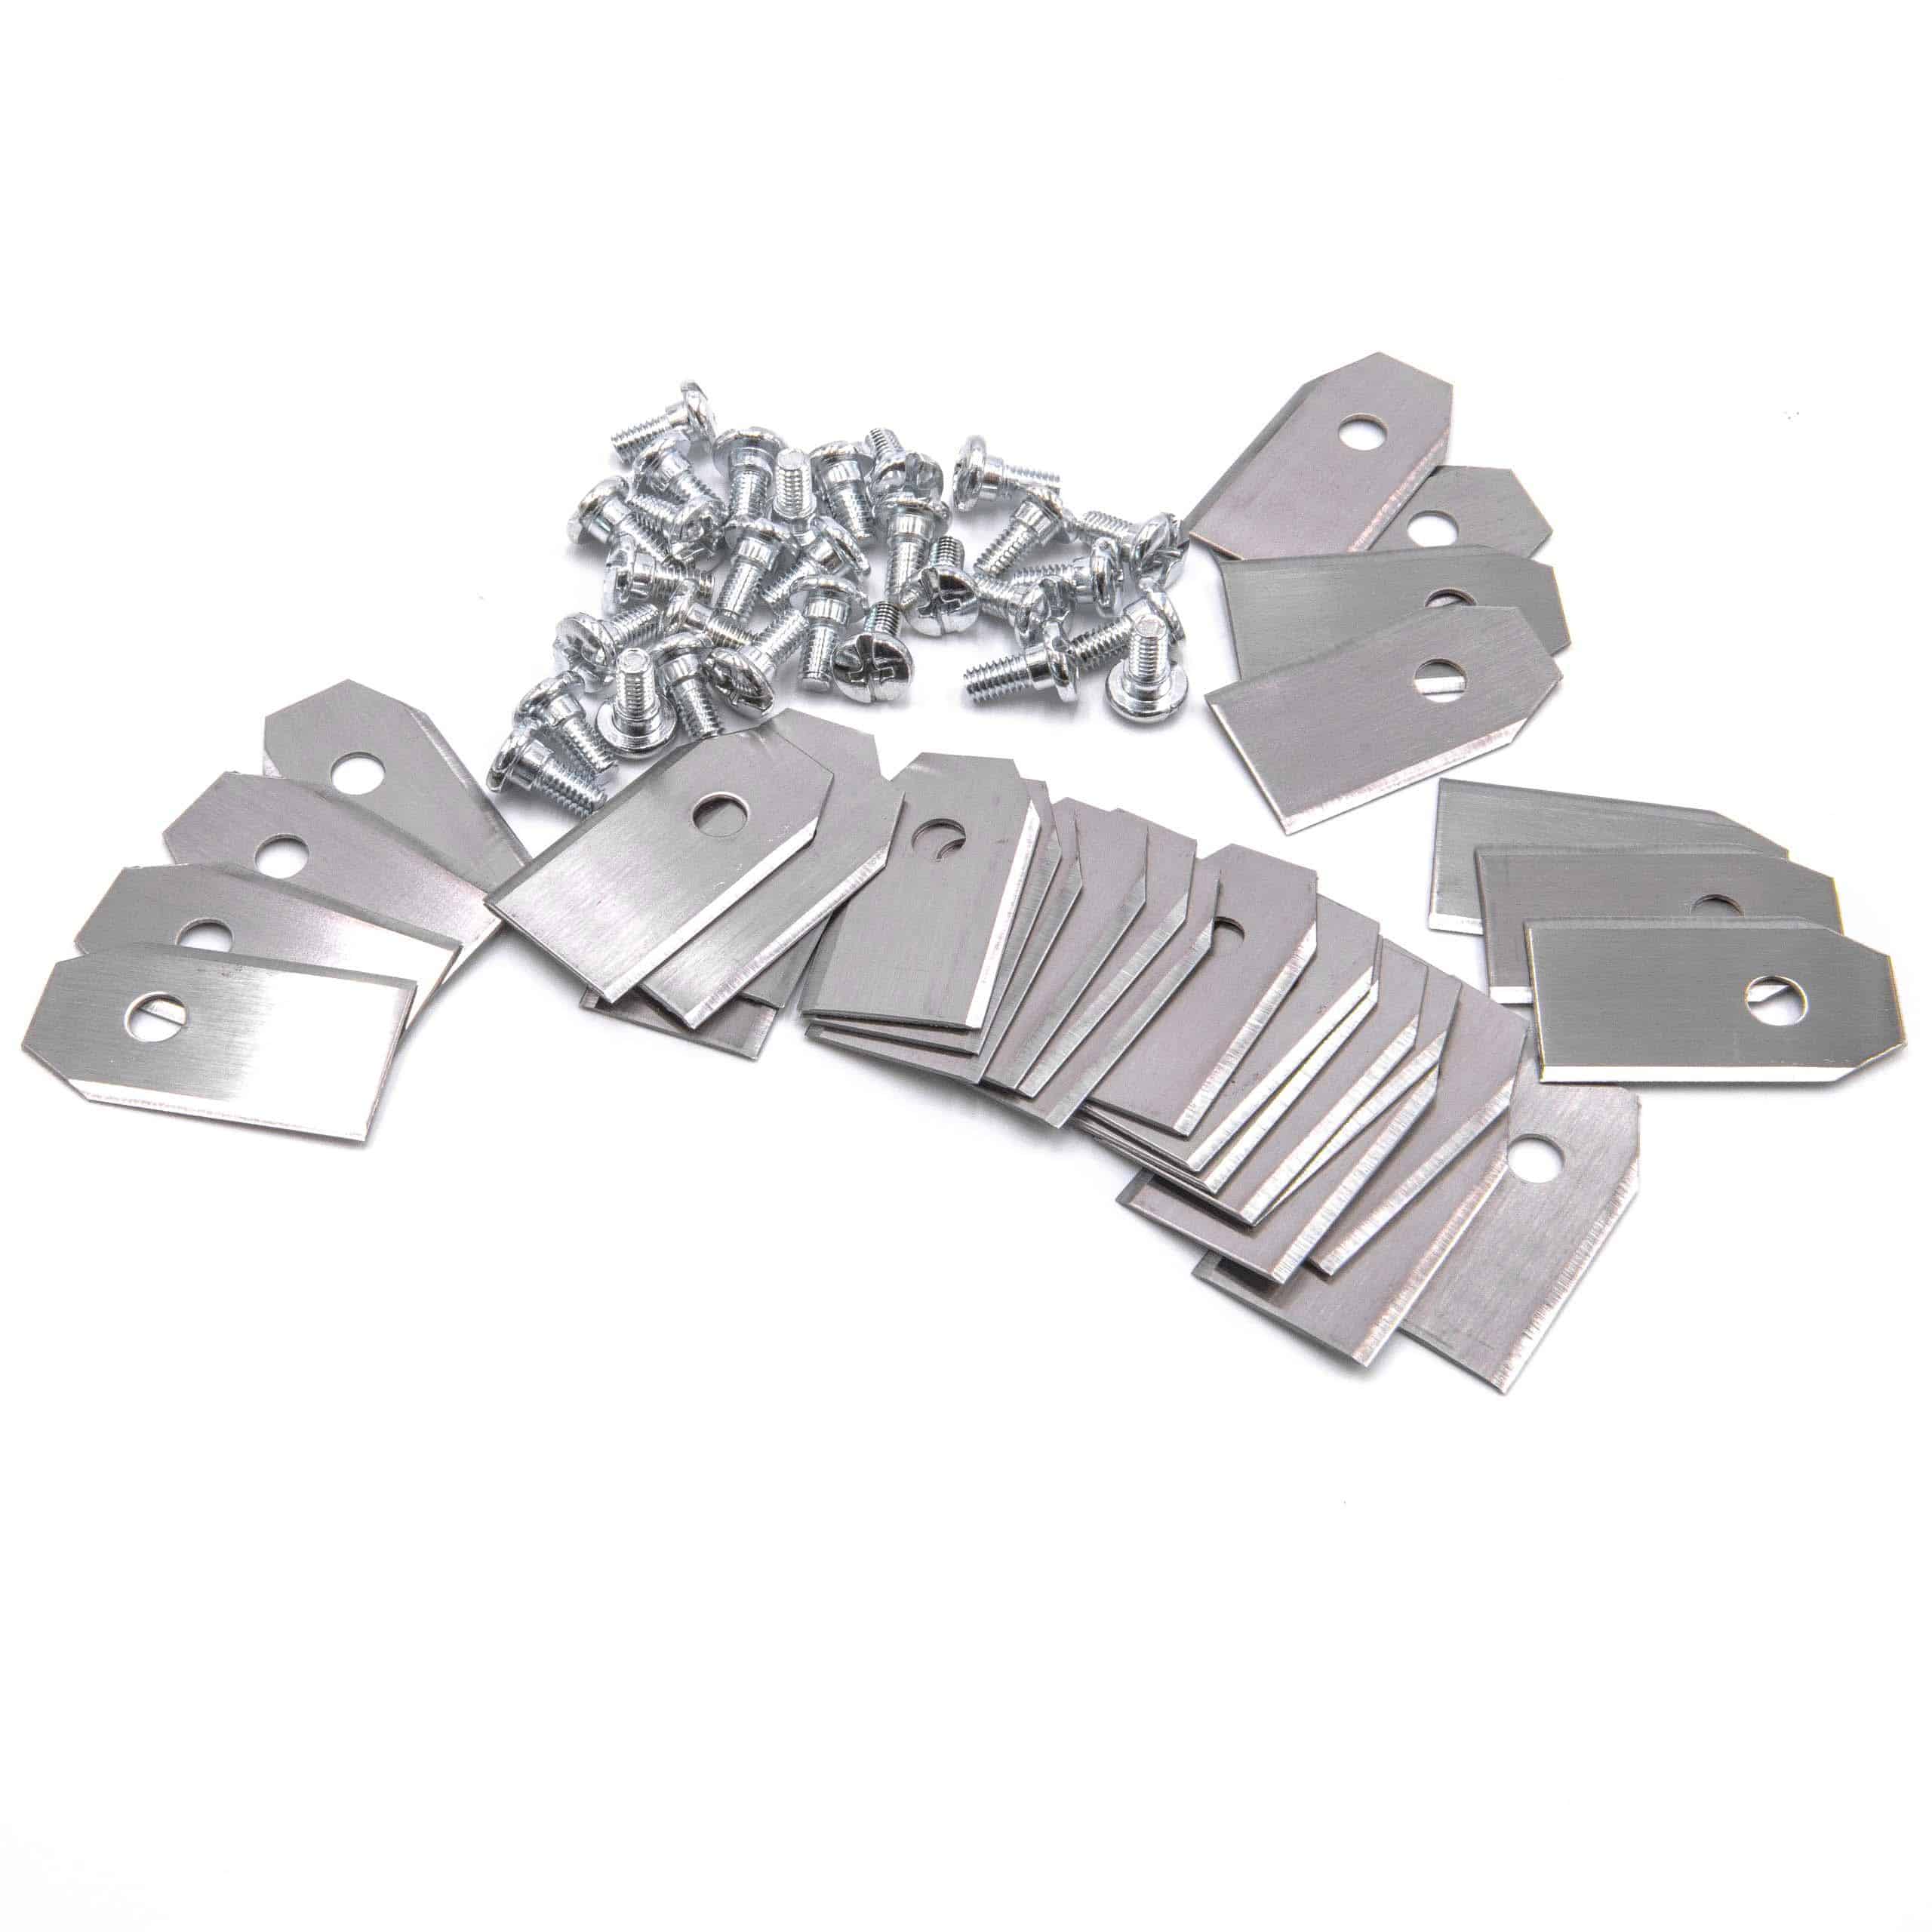 30x Exchange Blade replaces Arnold AR1 for Cordless Lawnmower etc. - steel, silver